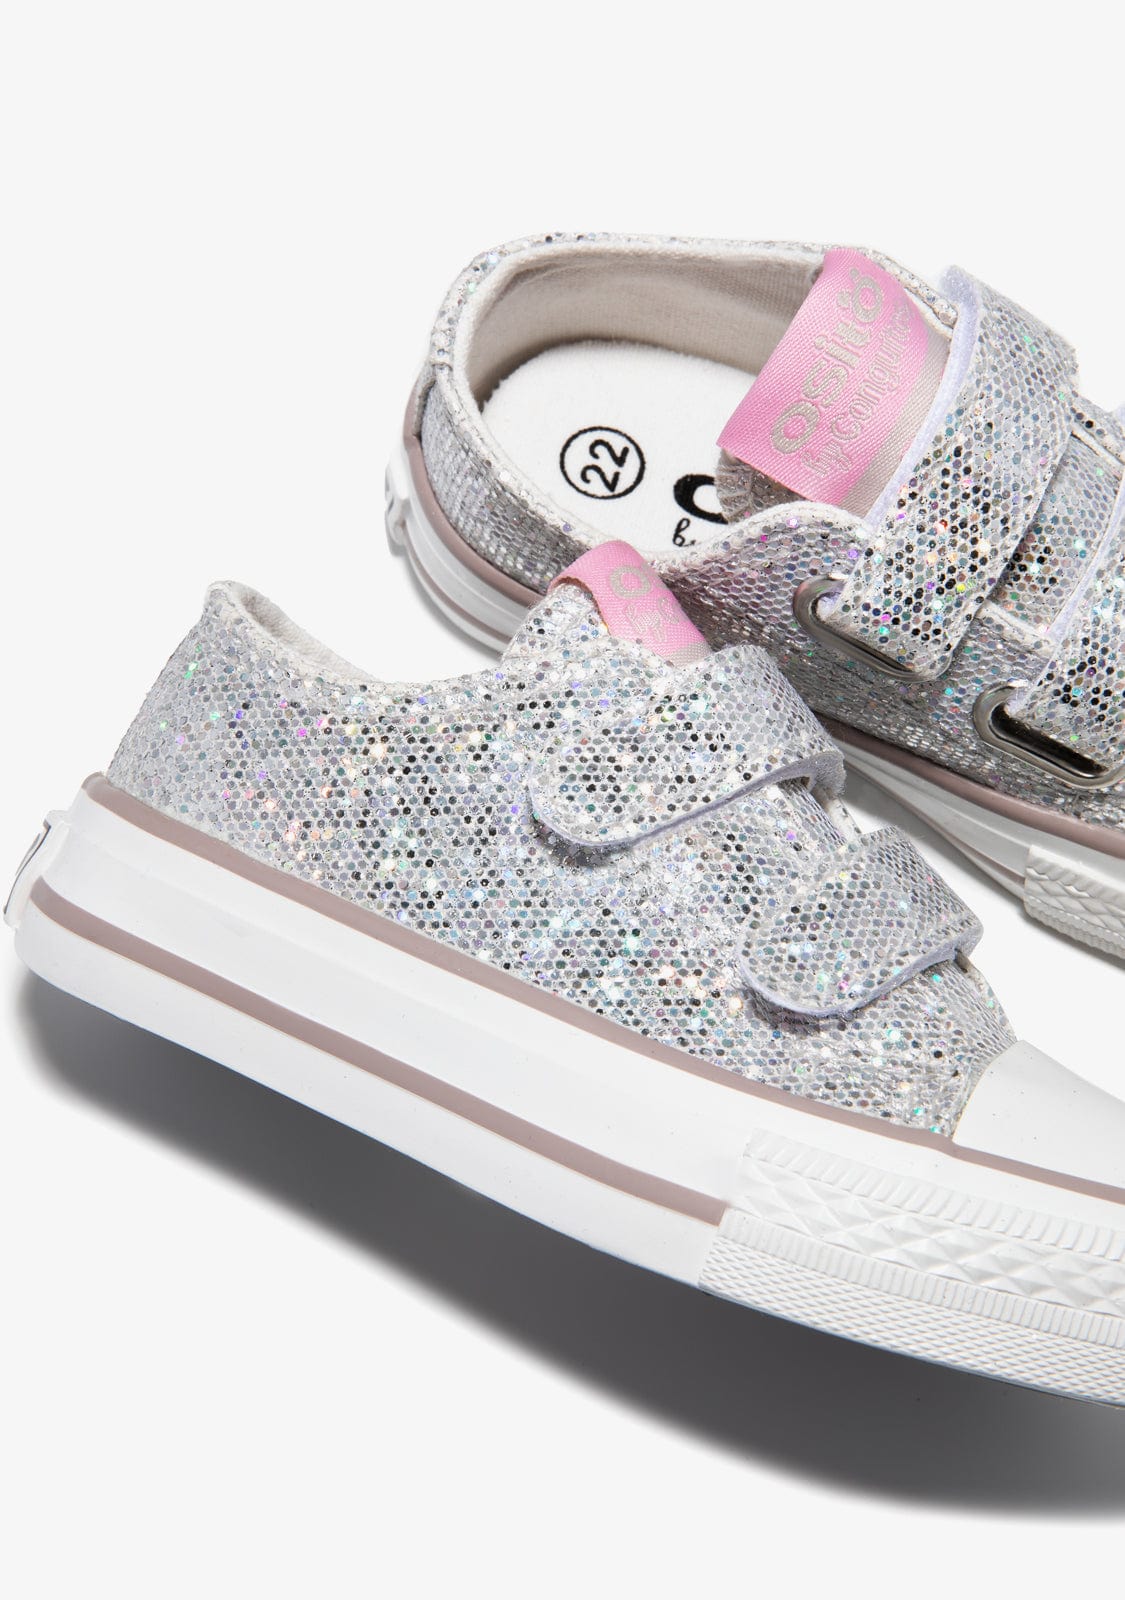 OSITO BASKET Baby´s Silver Glitter Sneakers